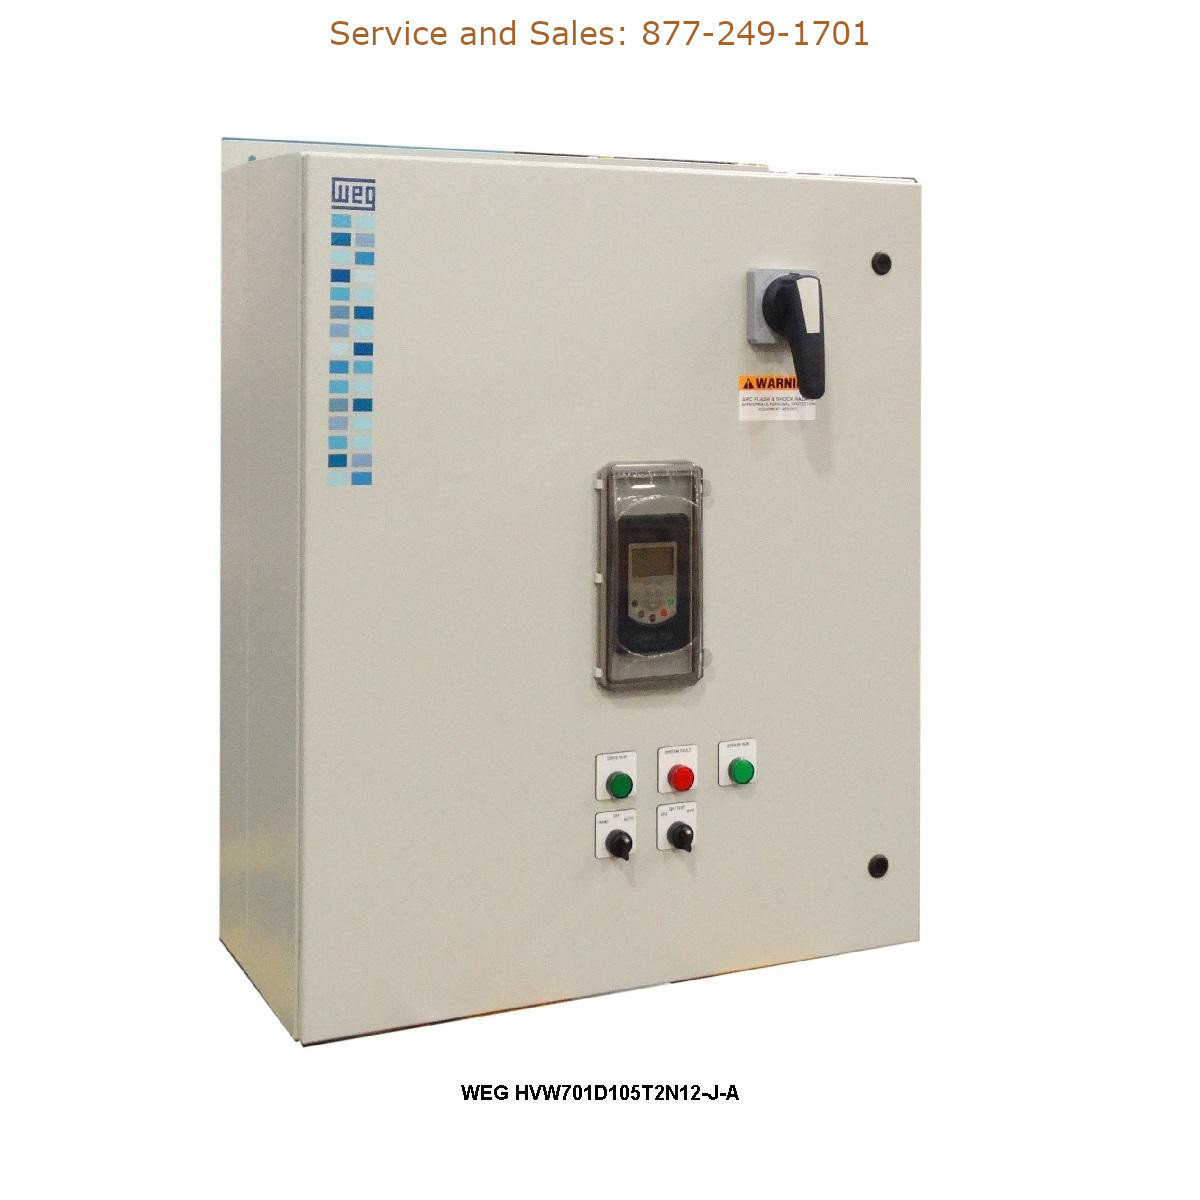 WEG HVW701D105T2N12-J-A WEG Model Number HVW701D105T2N12-J-A WEG Drives, Variable Speed Drives Repair Service, Troubleshooting, Replacement Parts https://gesrepair.com/wp-content/uploads/2022/WEG/WEG_HVW701D105T2N12-J-A_Drives_Variable_Speed_Drives.jpg